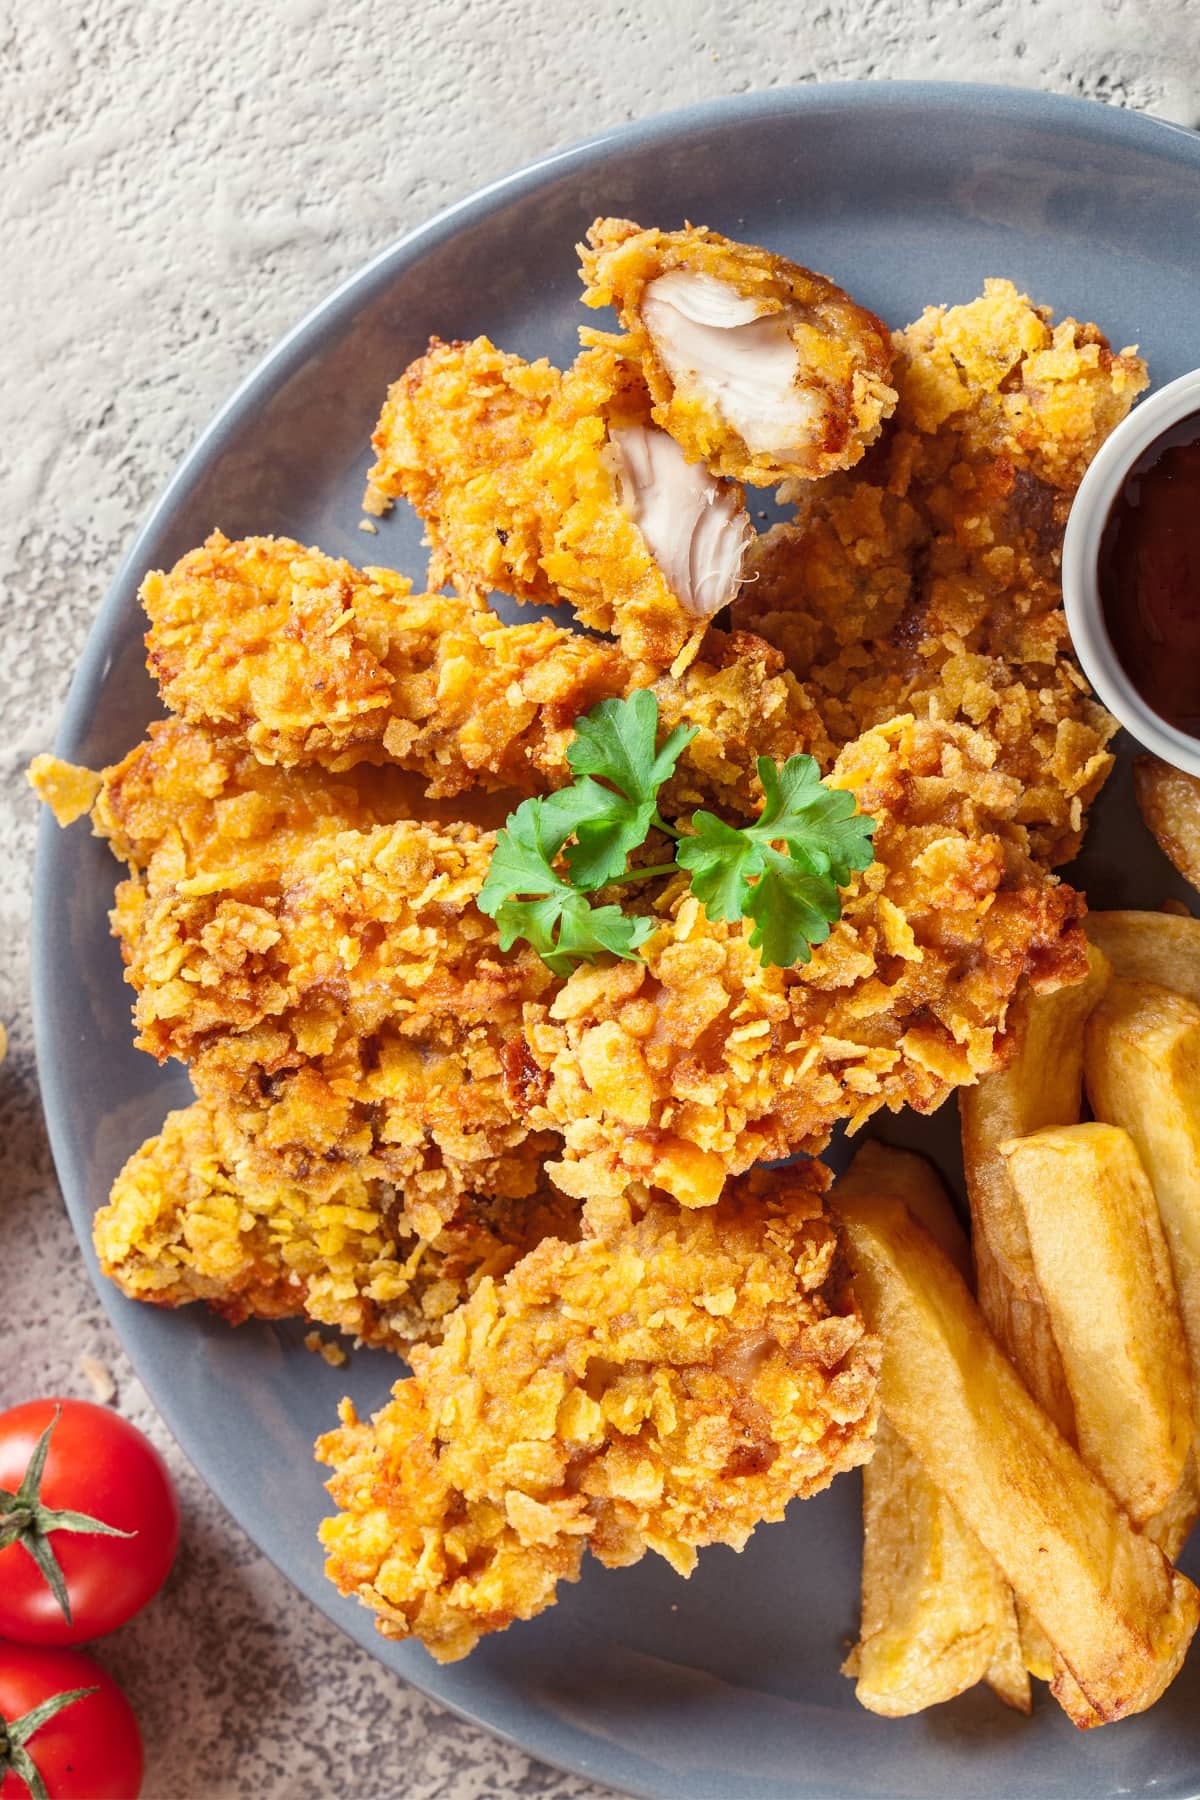 Crispy Fried Chicken with Bread Crumbs Served with Fries and Ketchup